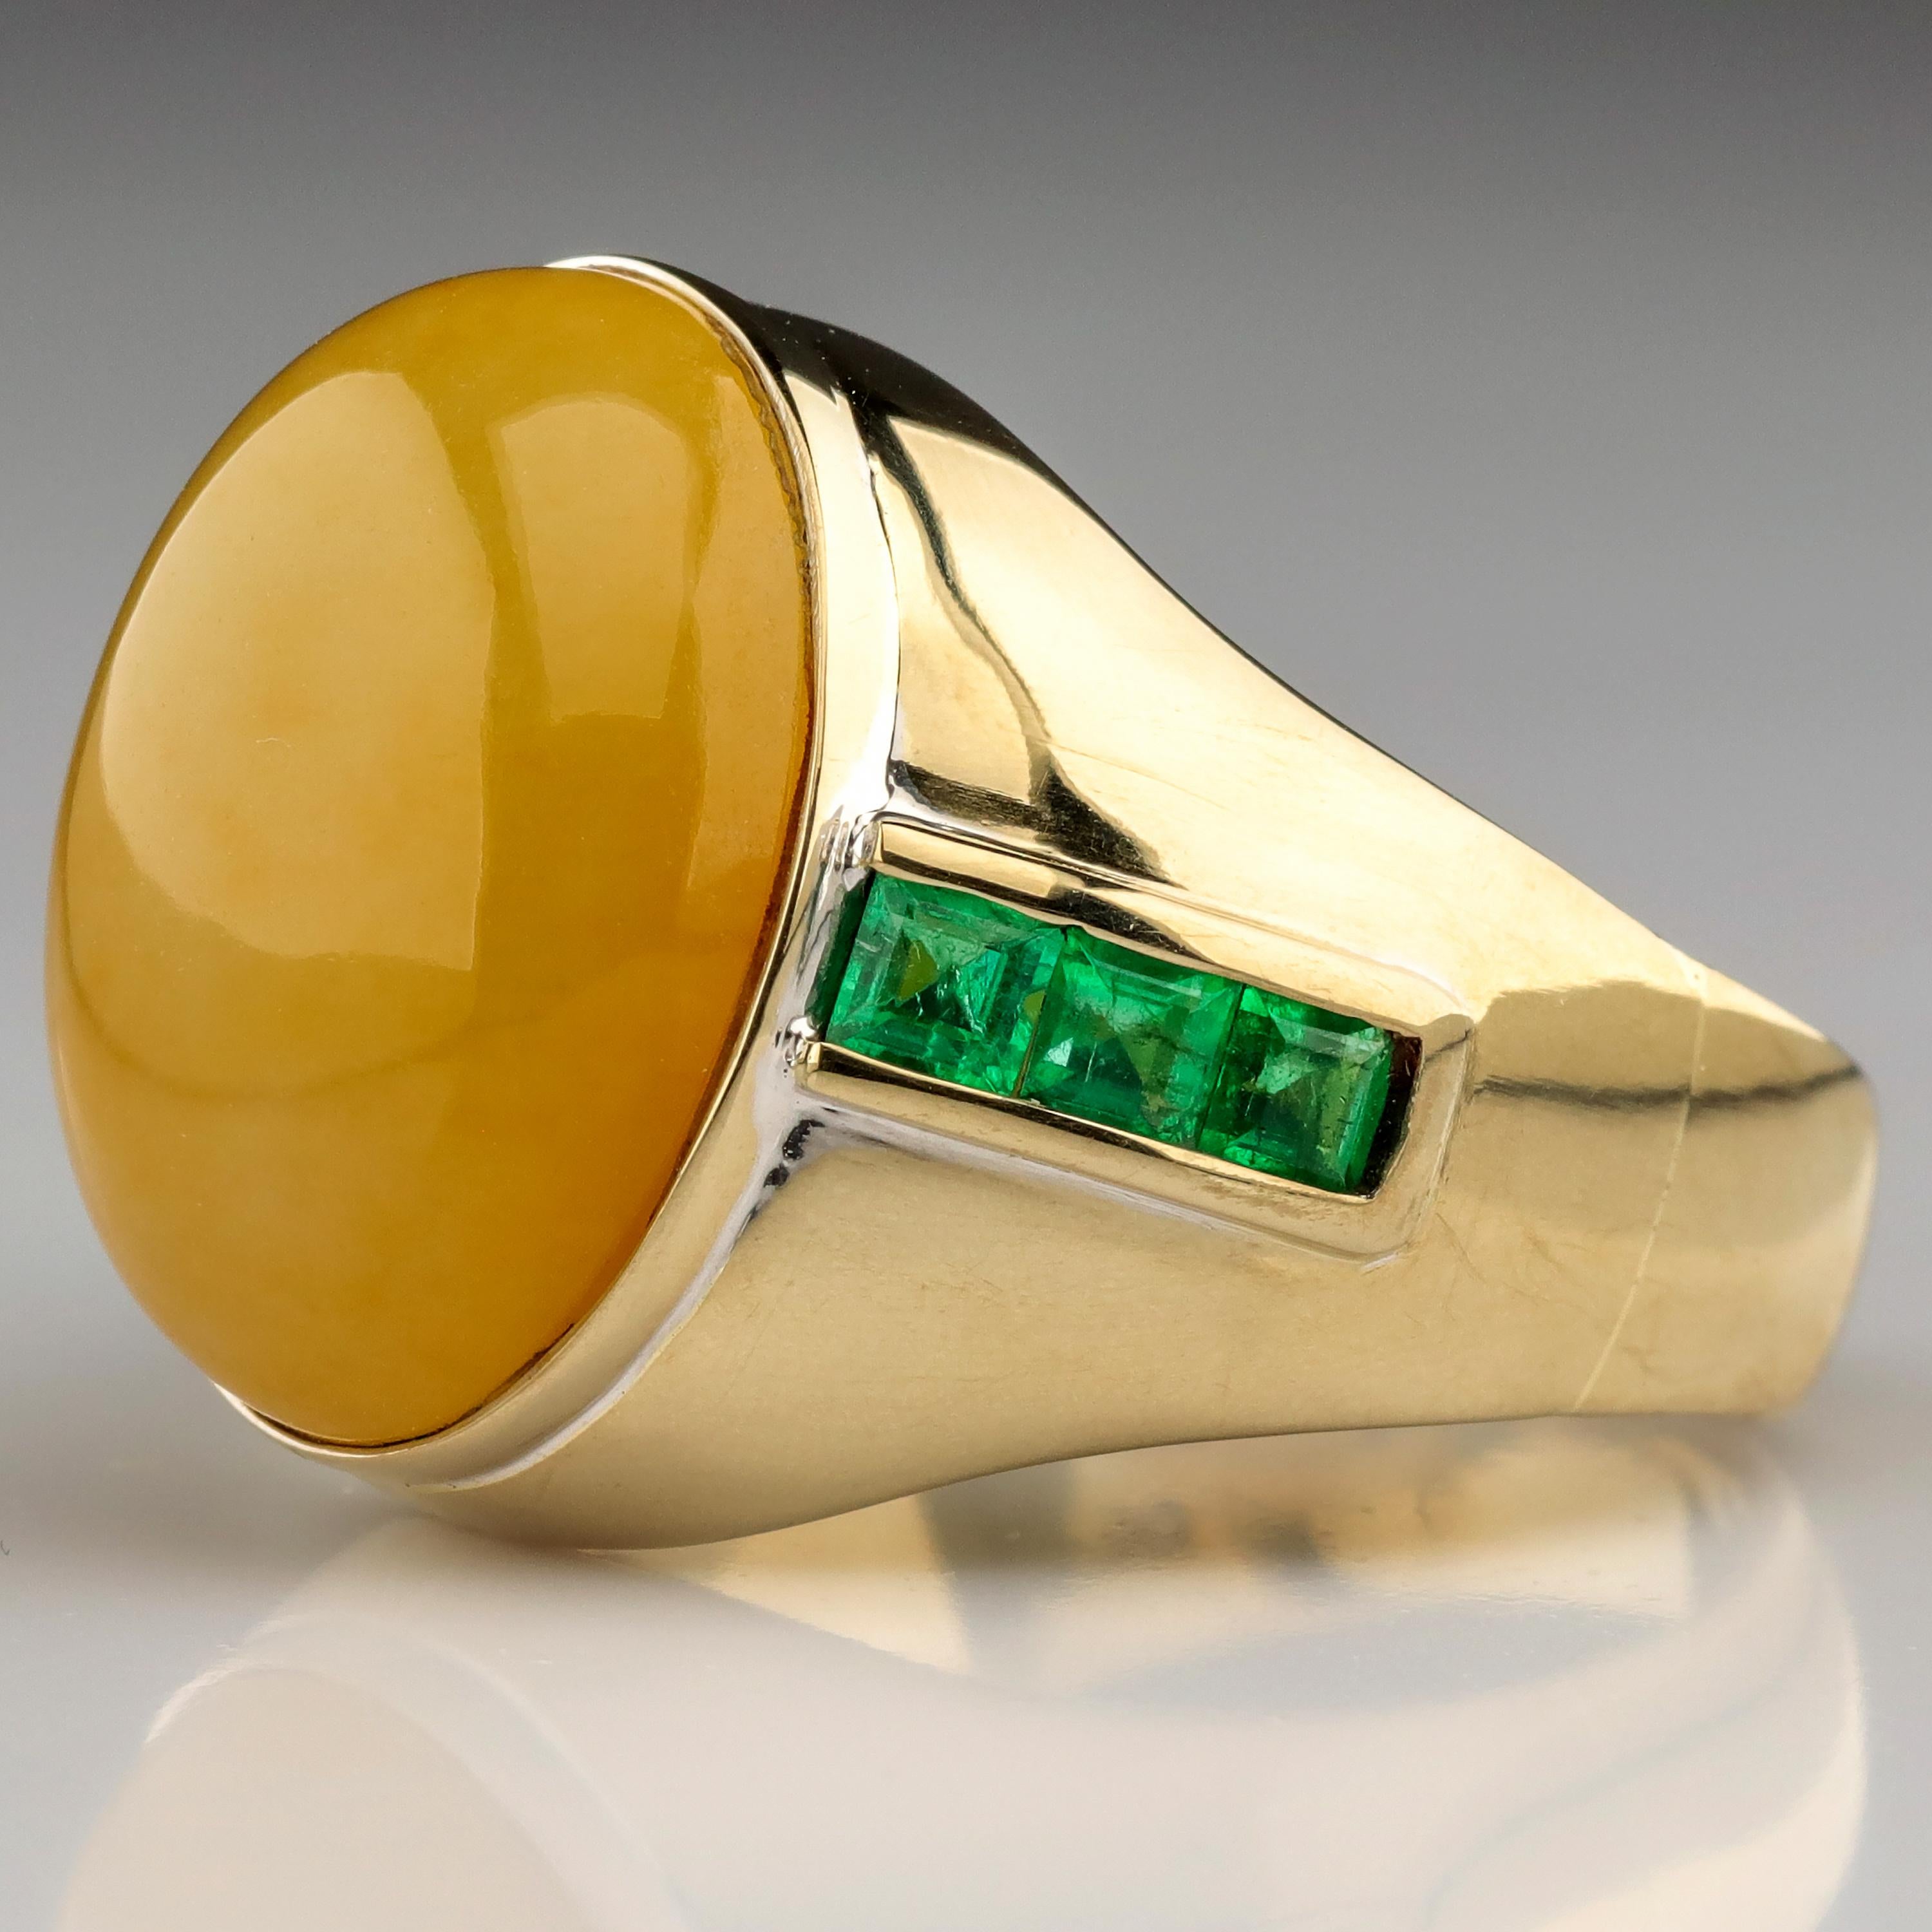 A yellow jade ring with Colombian emeralds is not a ring you see every day. But what an excellent and handsome combination it is.

Evenly-toned, finely-grained and highly translucent orangy-yellow jade is among the rarest gemstones on earth. Green